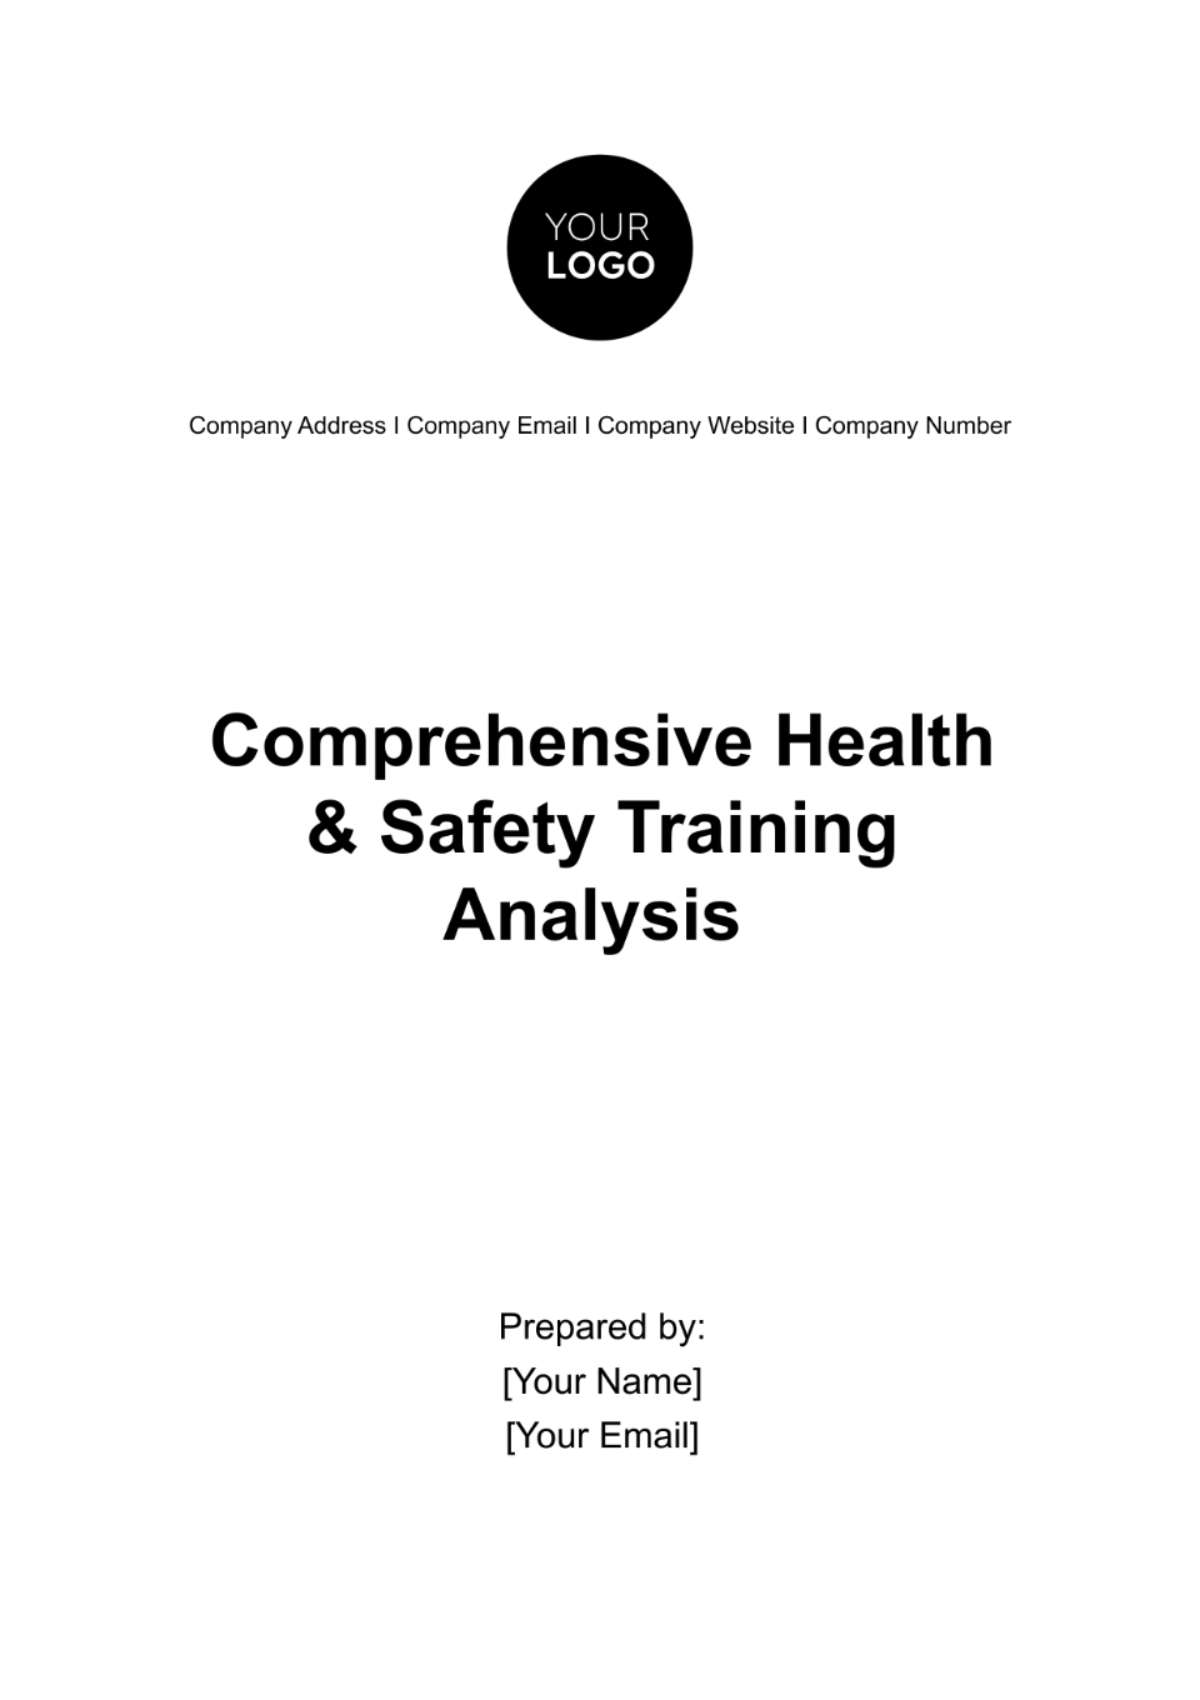 Comprehensive Health & Safety Training Analysis Template